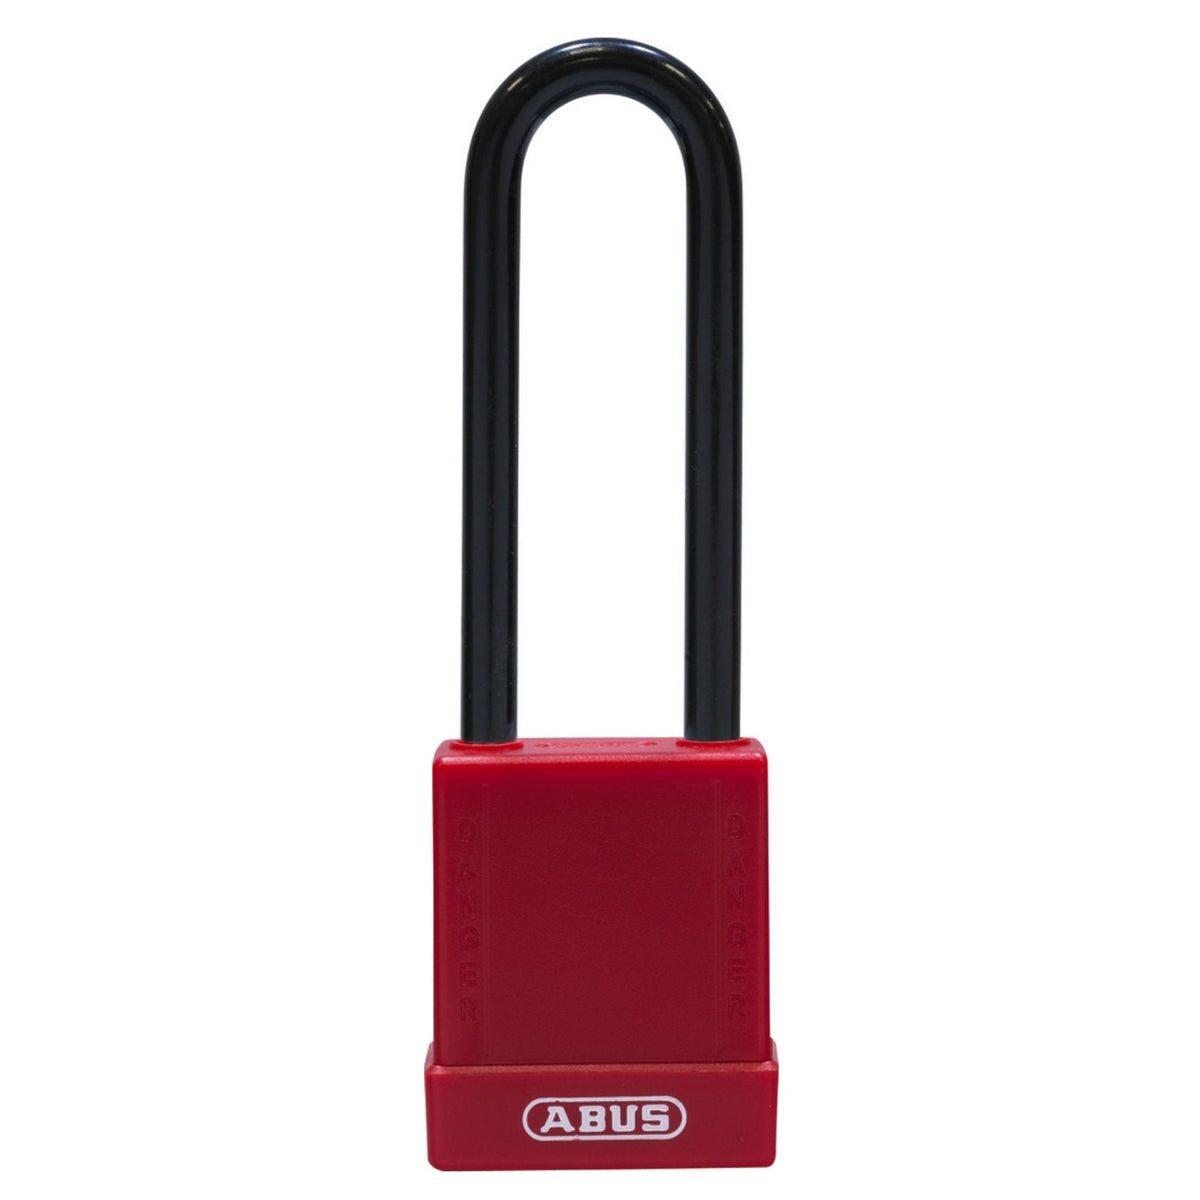 Abus 76PS/40 Red Safety Lock with 3-Inch Steel Shackle Covered by Plastic Sleeve - The Lock Source